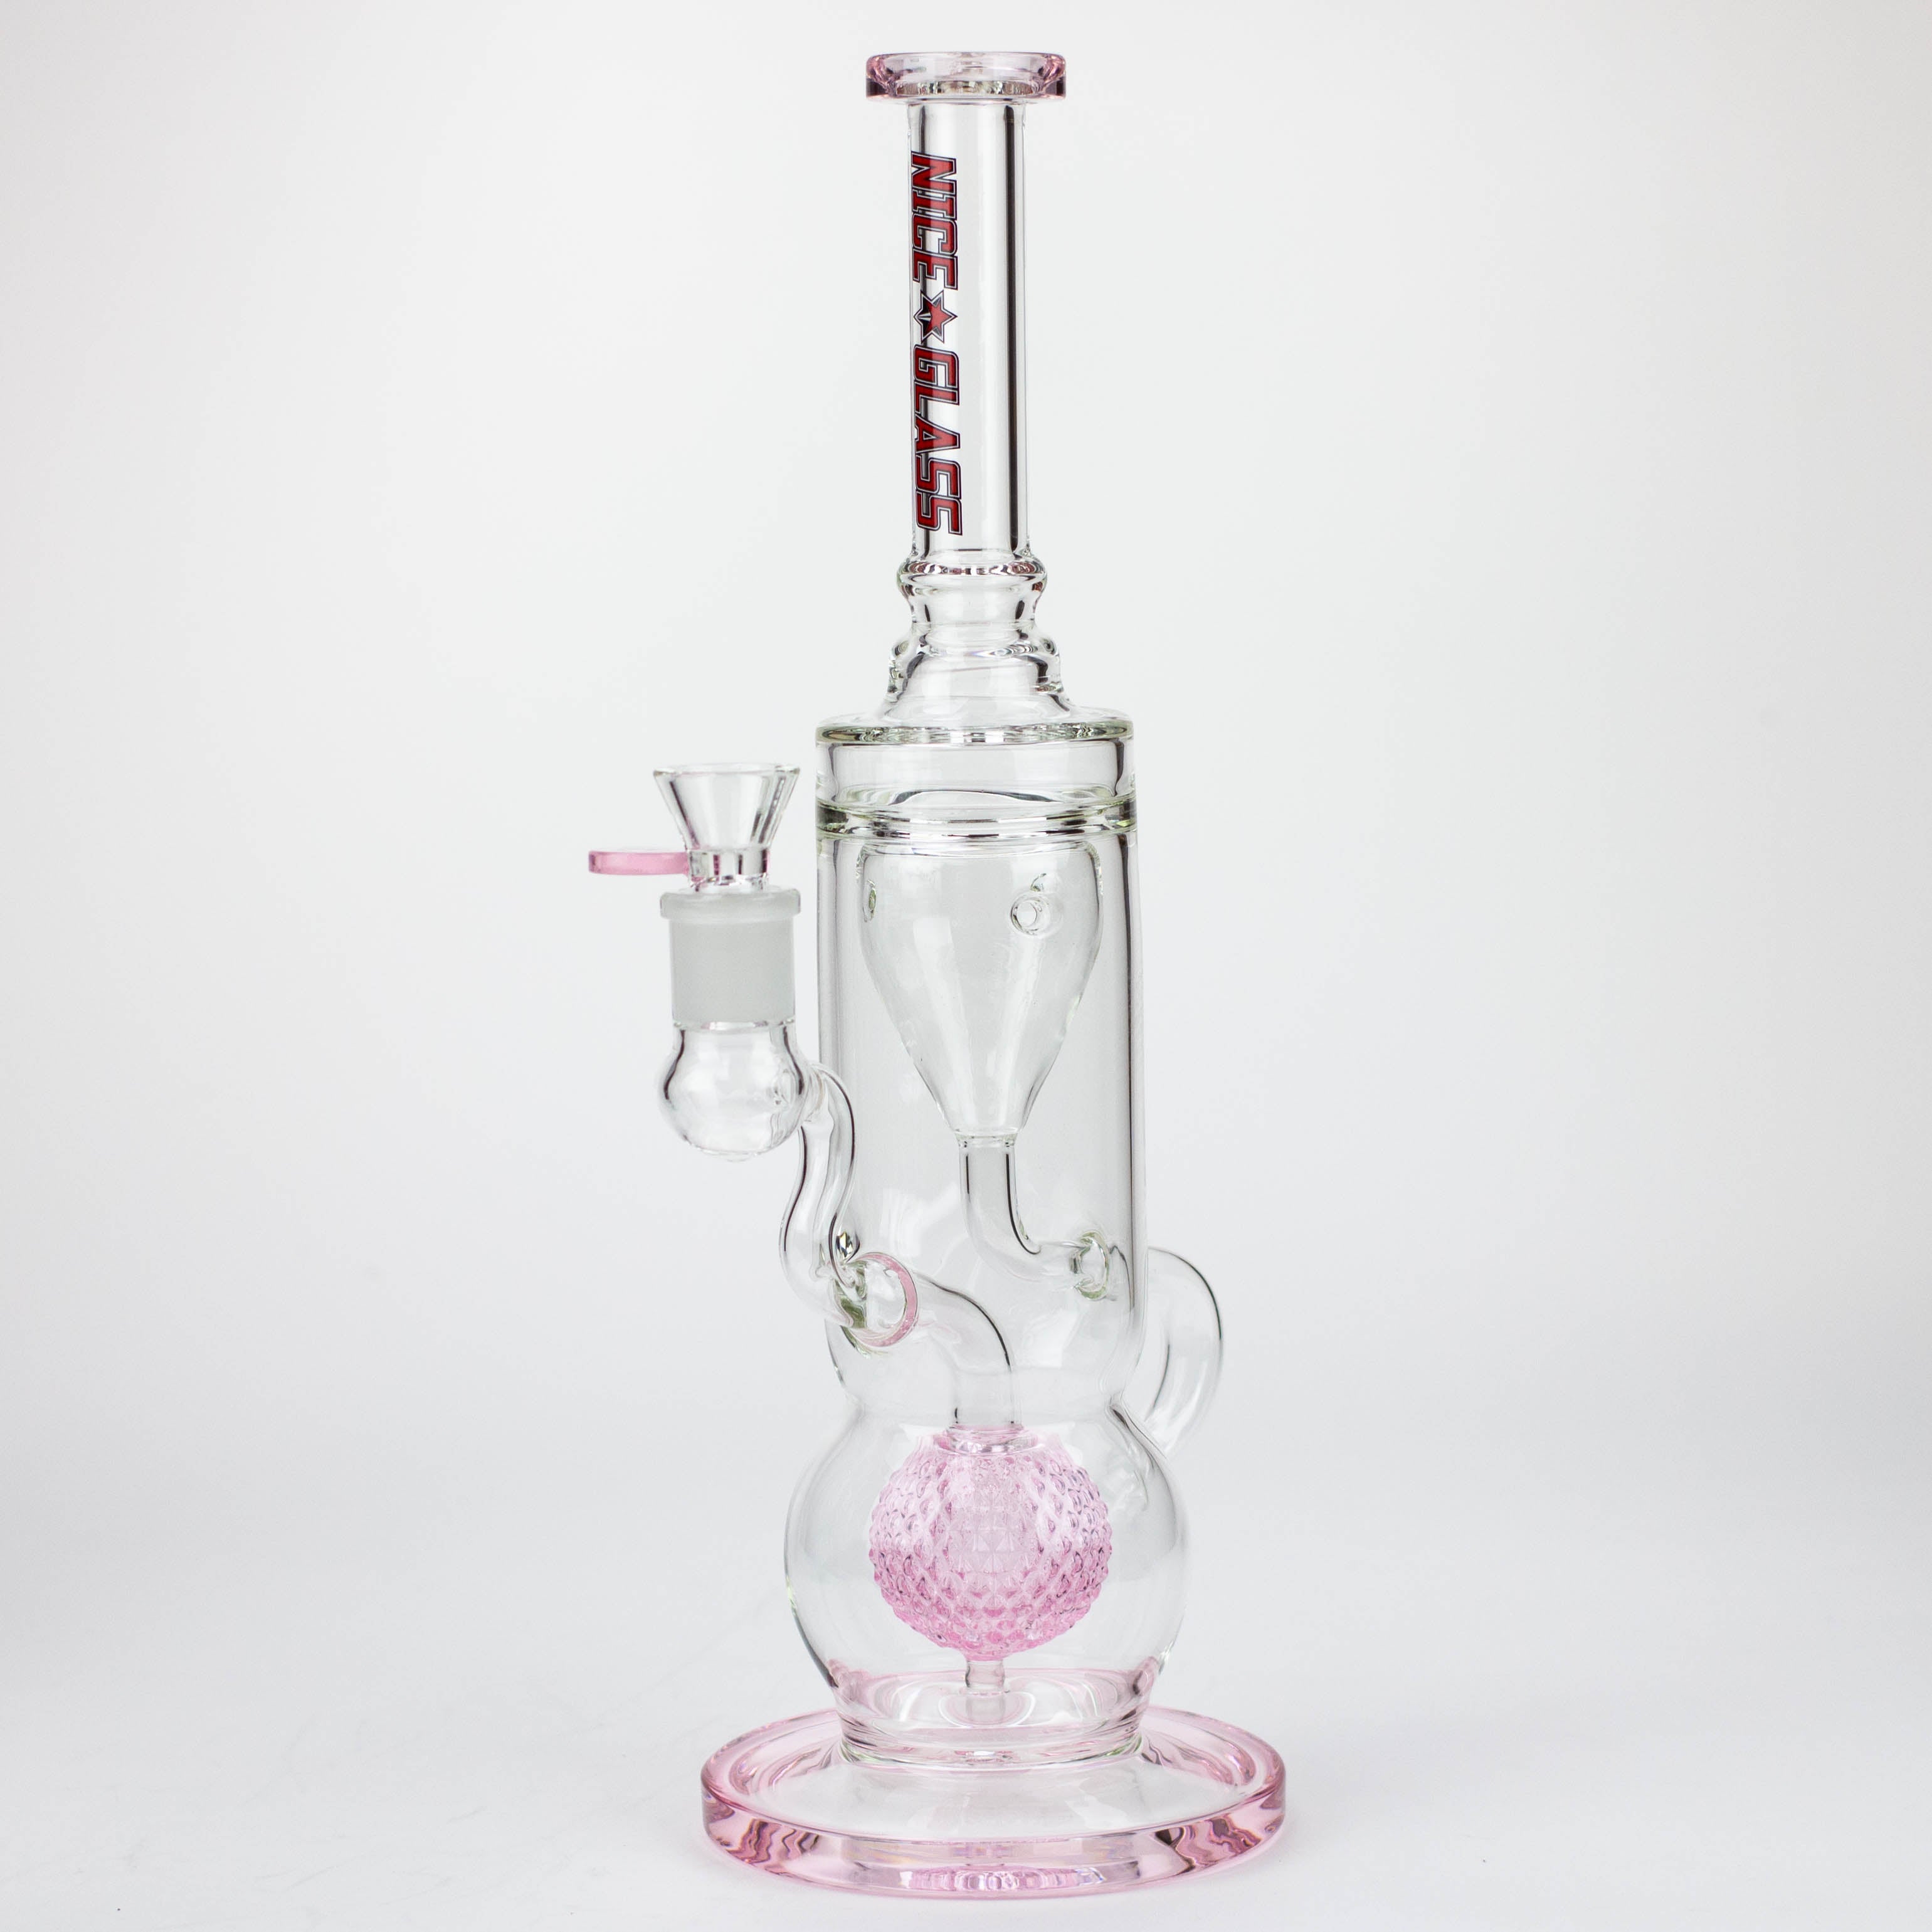 15 inch Textured Ball Incycler Rig_6